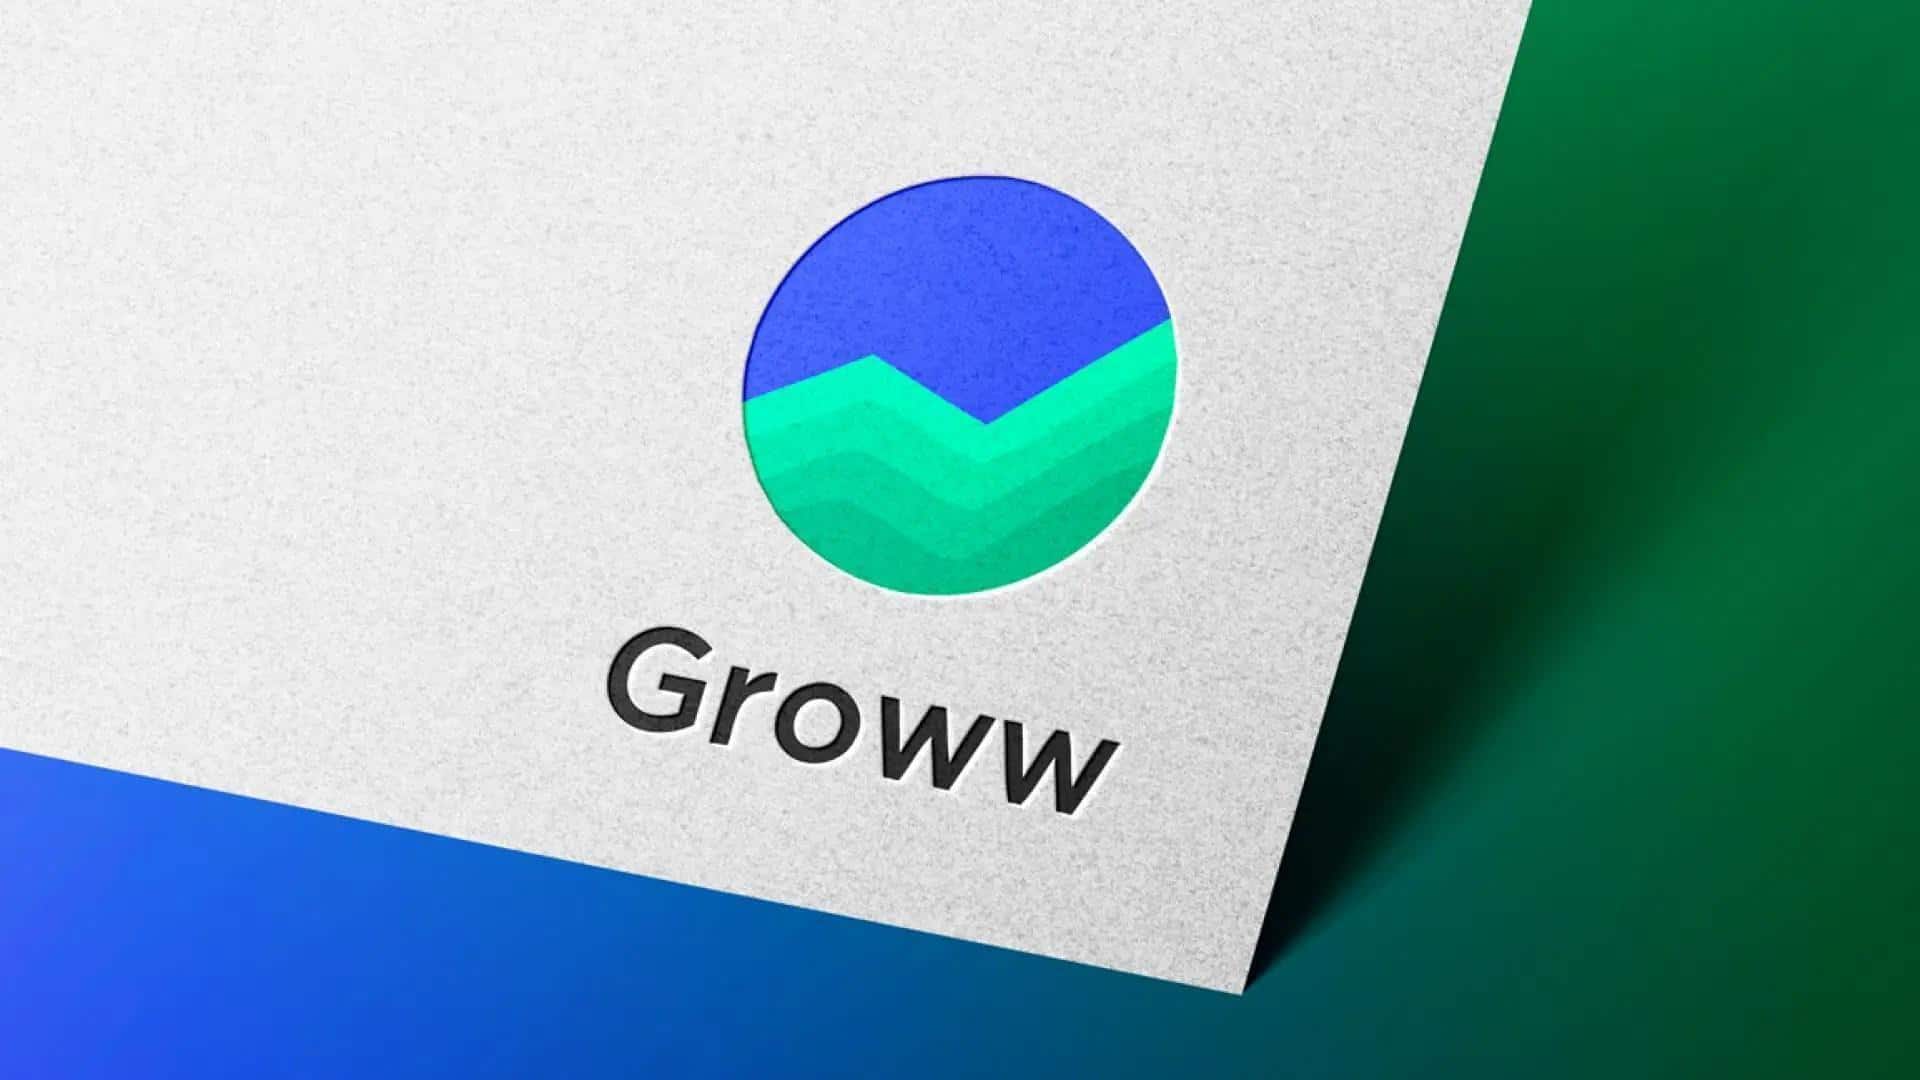 Groww faces accusations of investment fraud, takes remedial steps